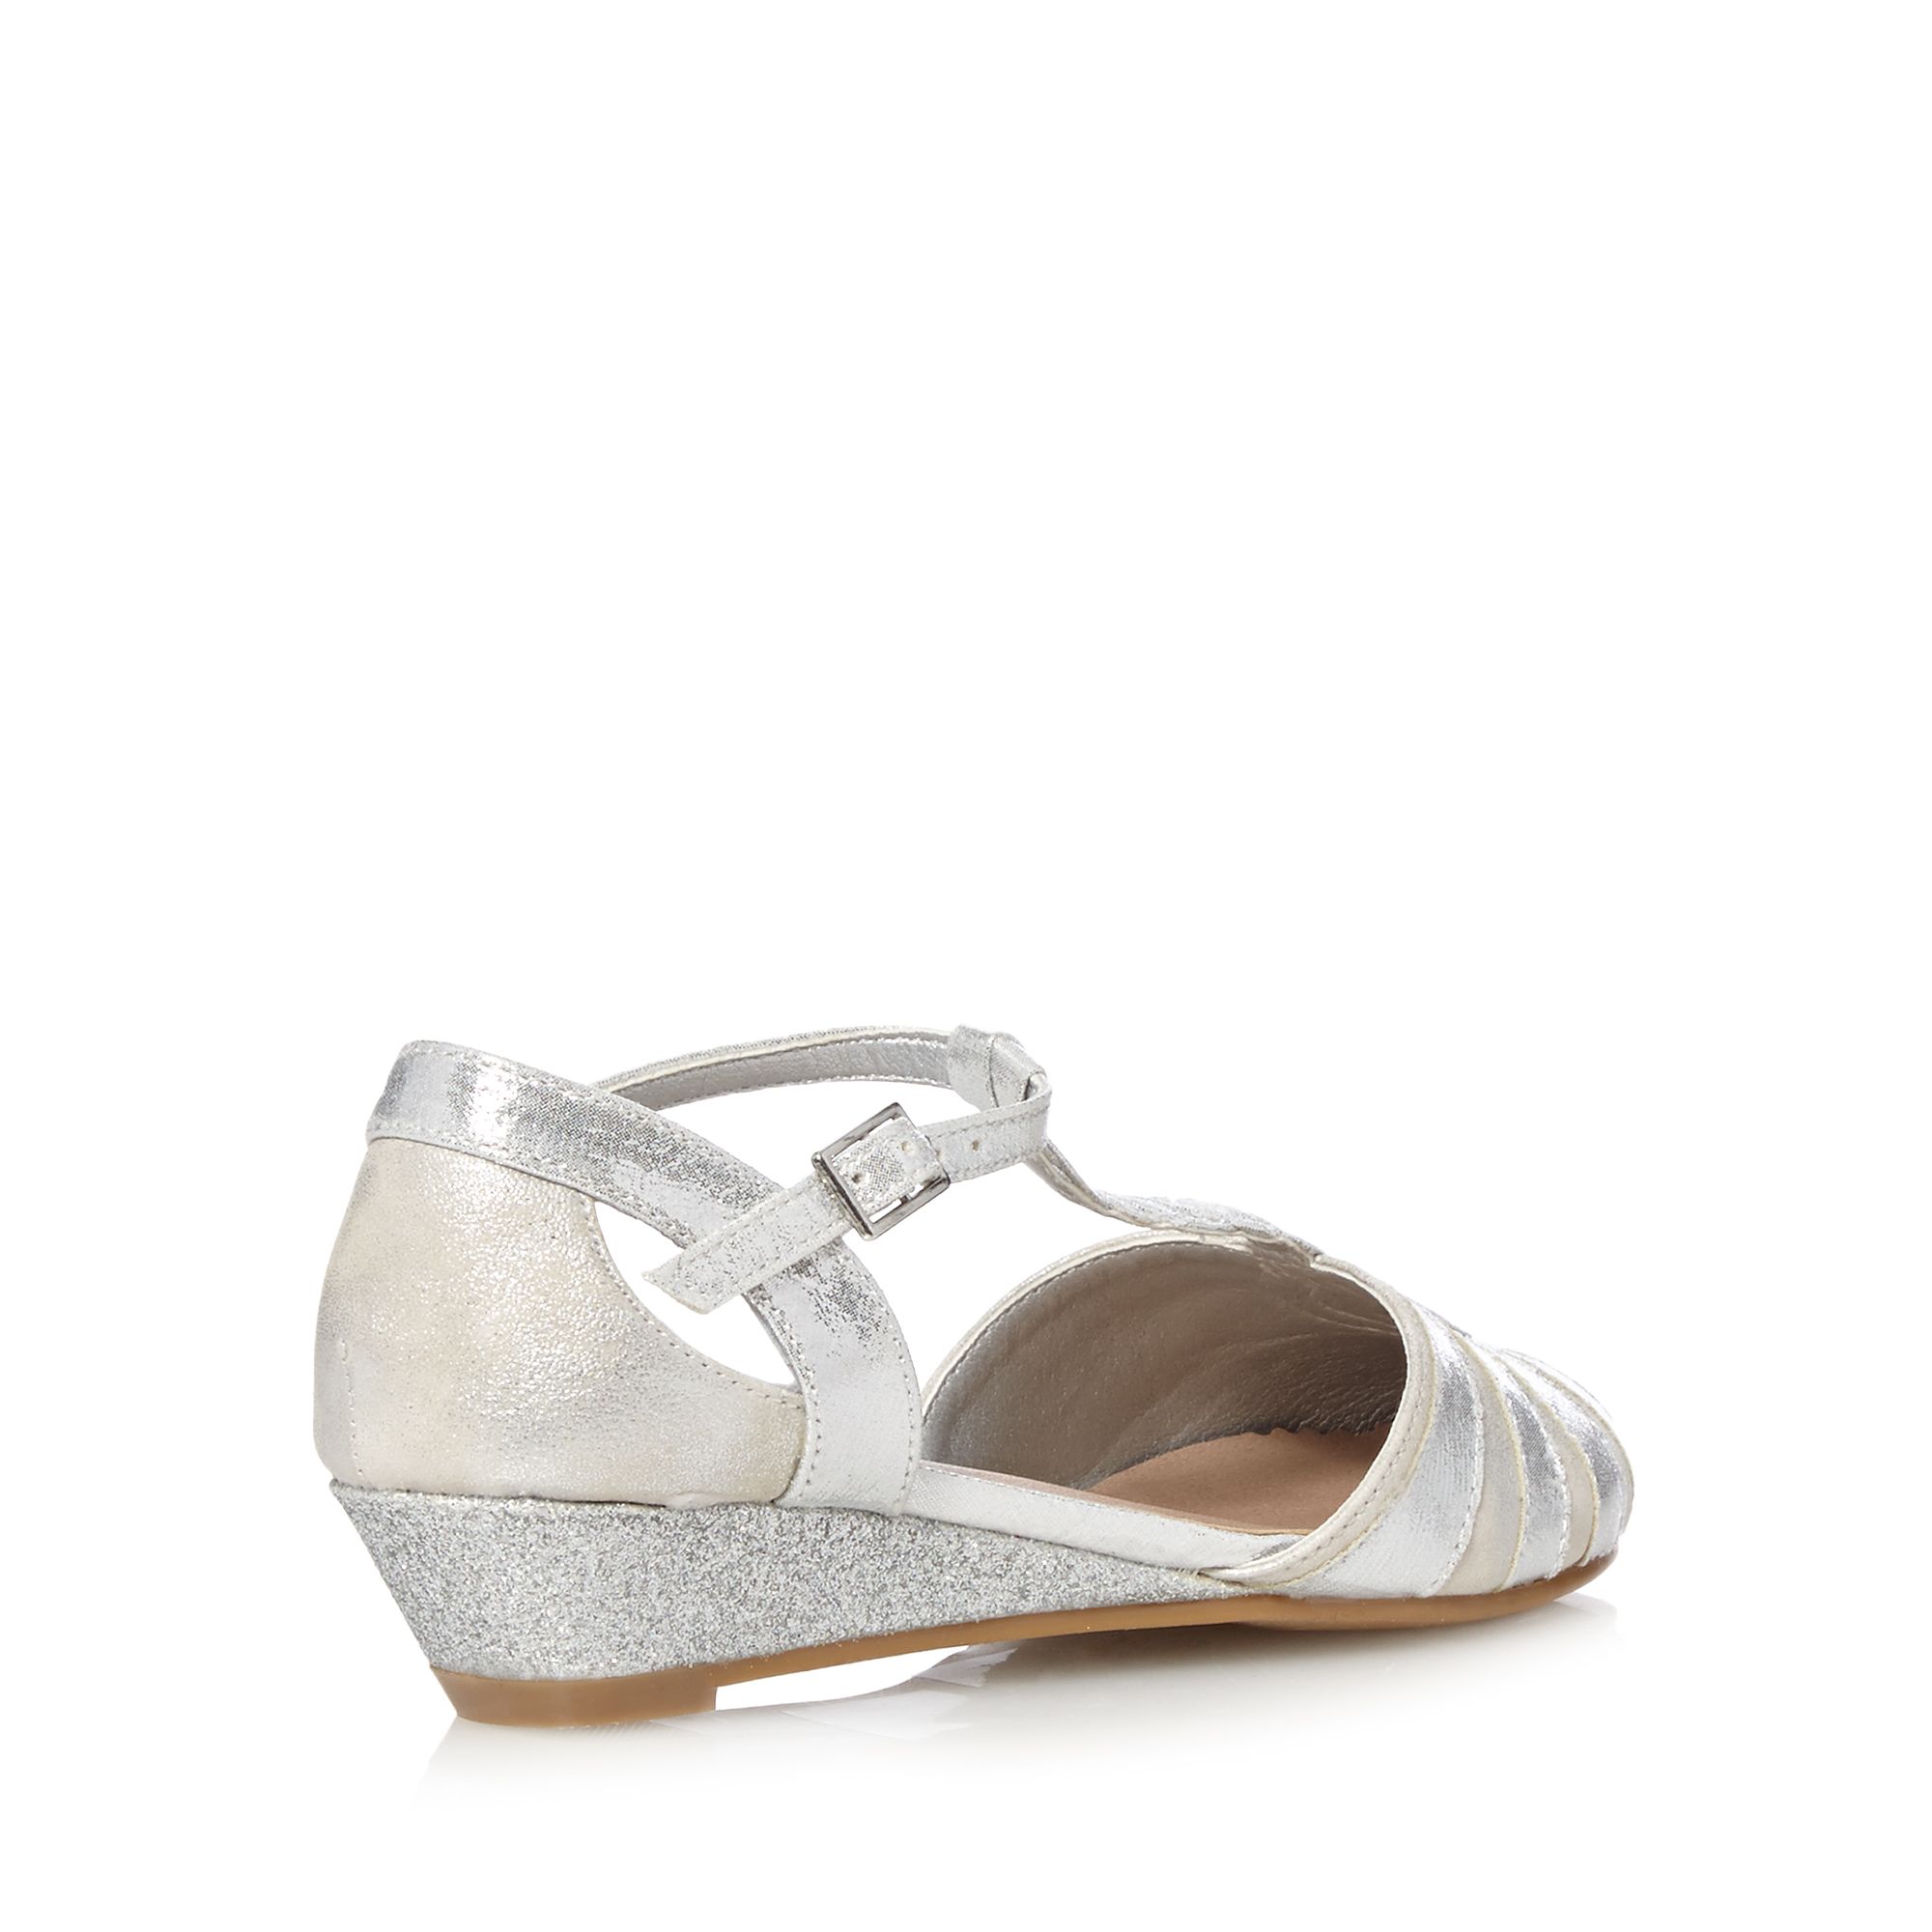 Bluezoo Girl's Silver Closed Toe Low Wedge Sandals From Debenhams | eBay